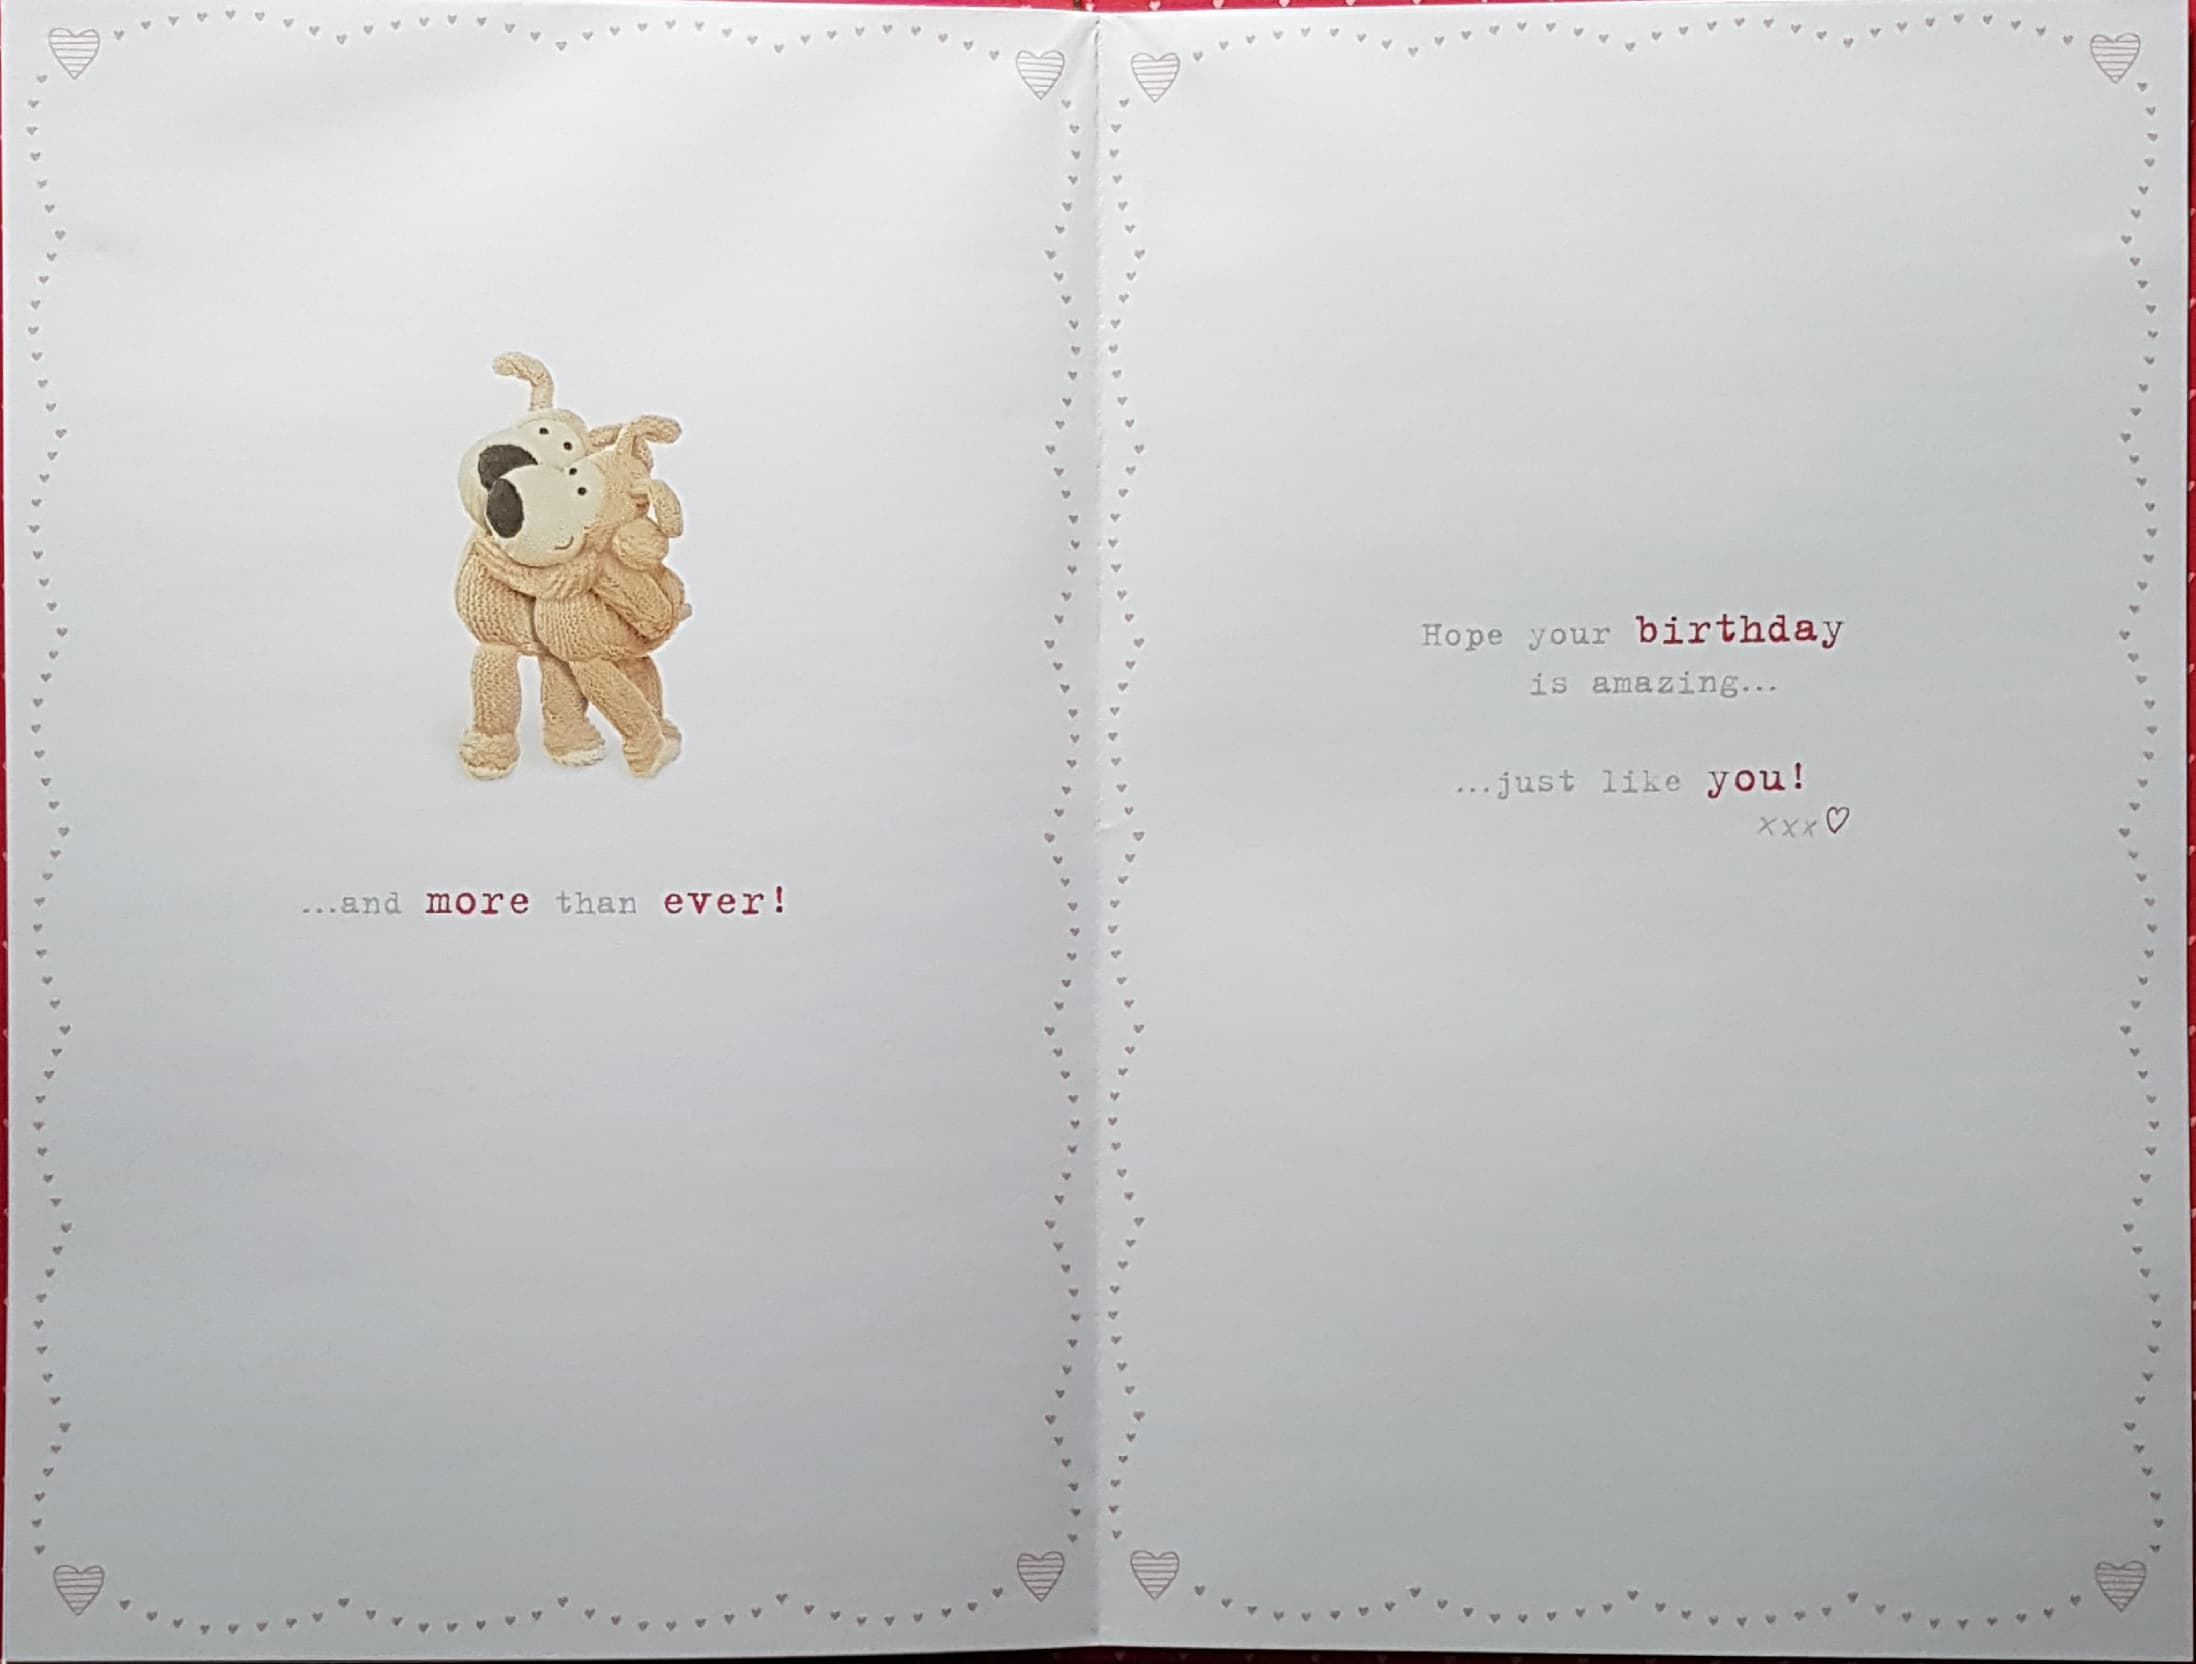 Birthday Card - One I Love / You Mean The World To Me...& A White Globe